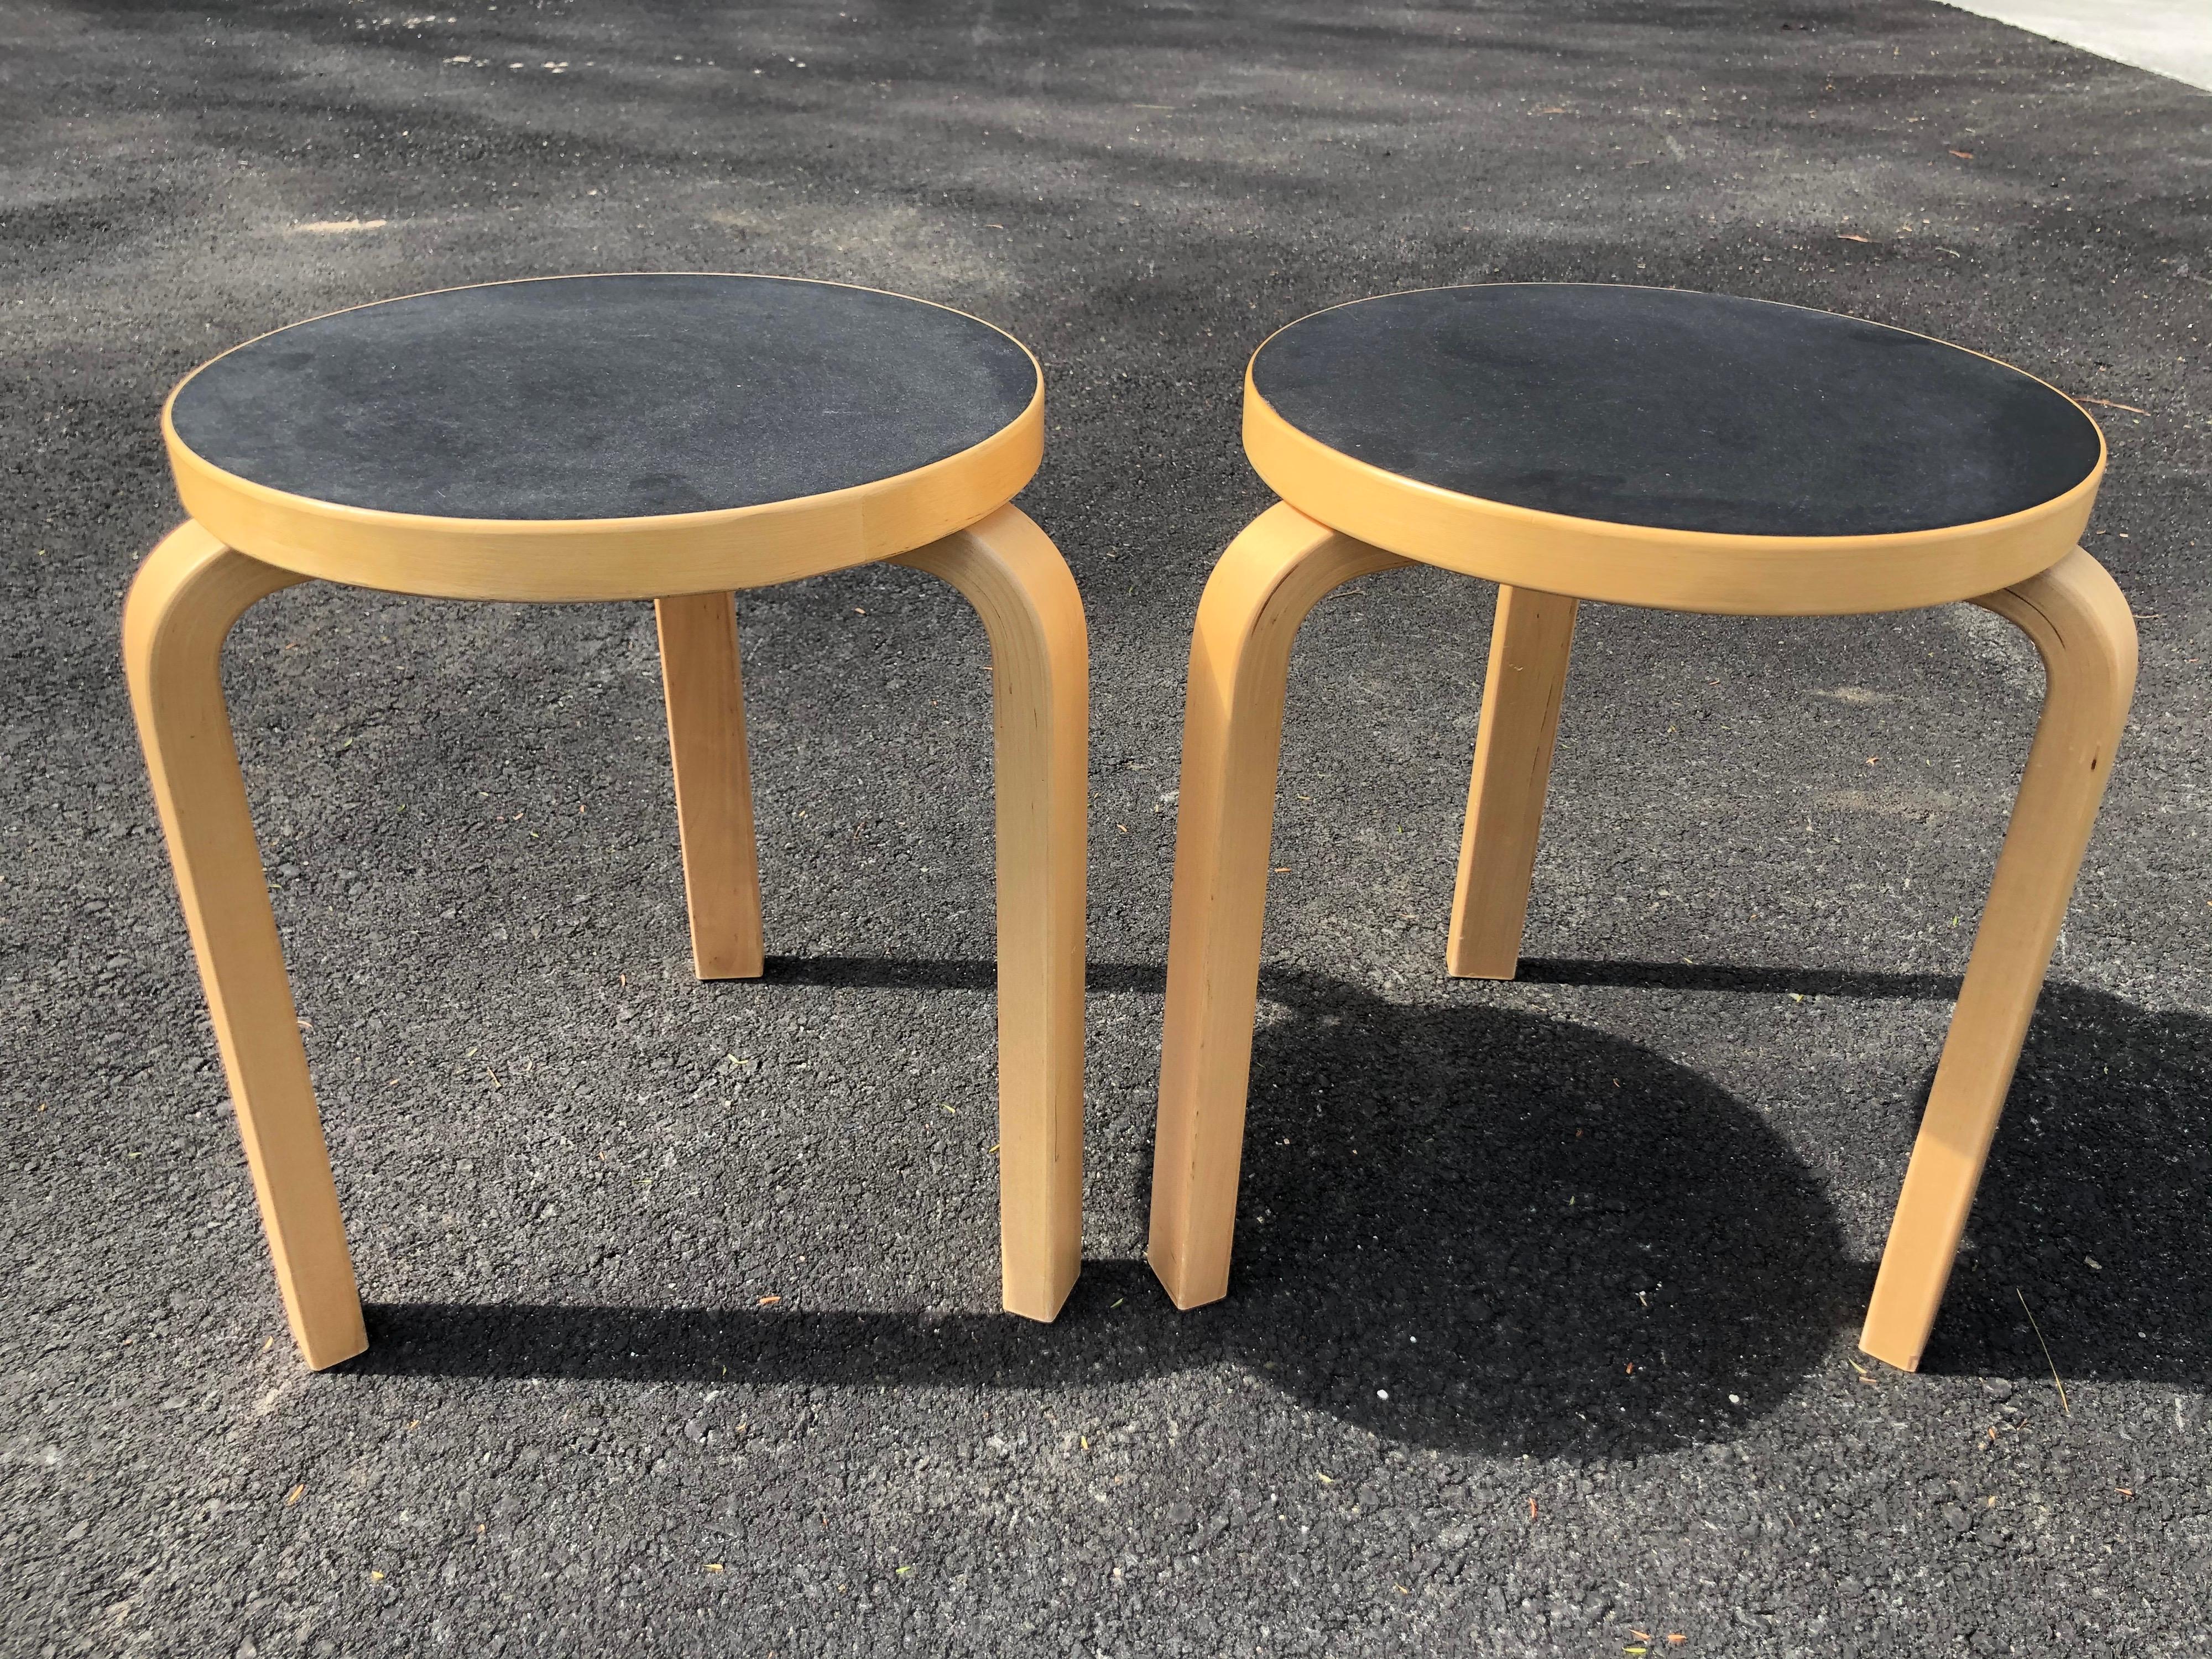 Pair of Alvar Aalto Mid-Century Modern round stools. Signed underneath ICF imports. Made in Finland.
These have black linoleum tops and three wooden legs and they stack. We believe this is Style# Stool 60.
Table top diameter is 13.50